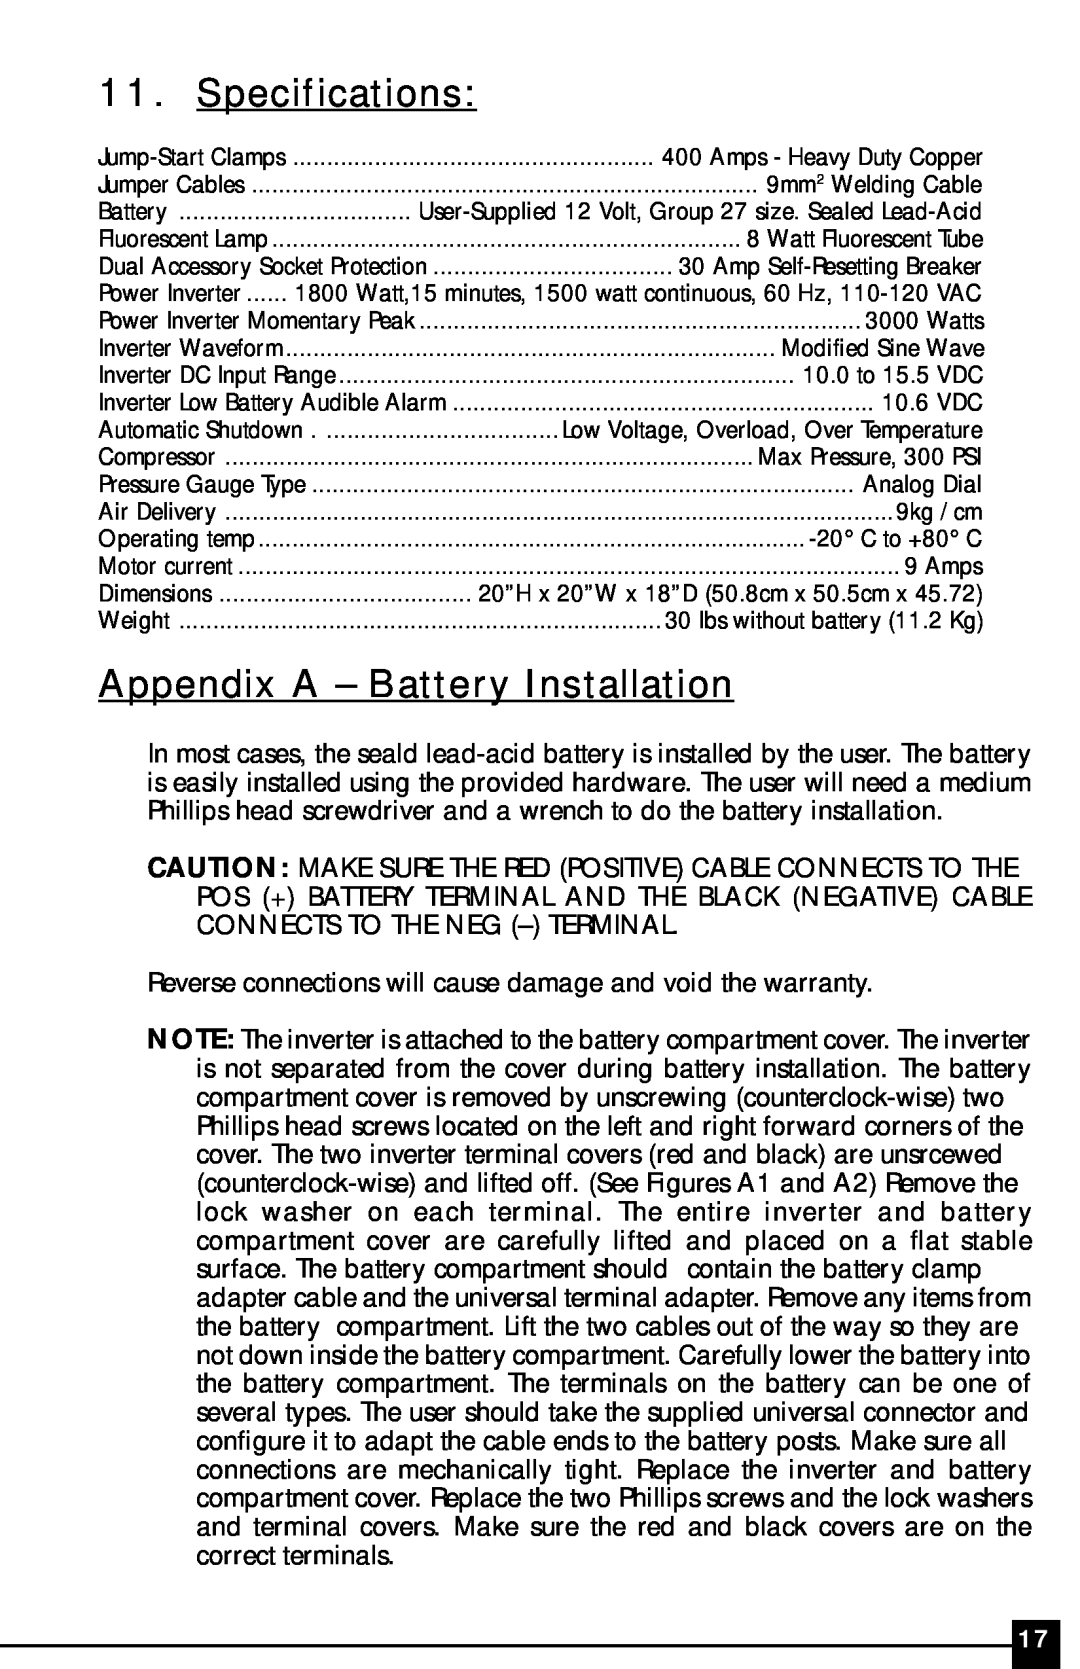 Vector VEC097 owner manual Specifications, Appendix A – Battery Installation 